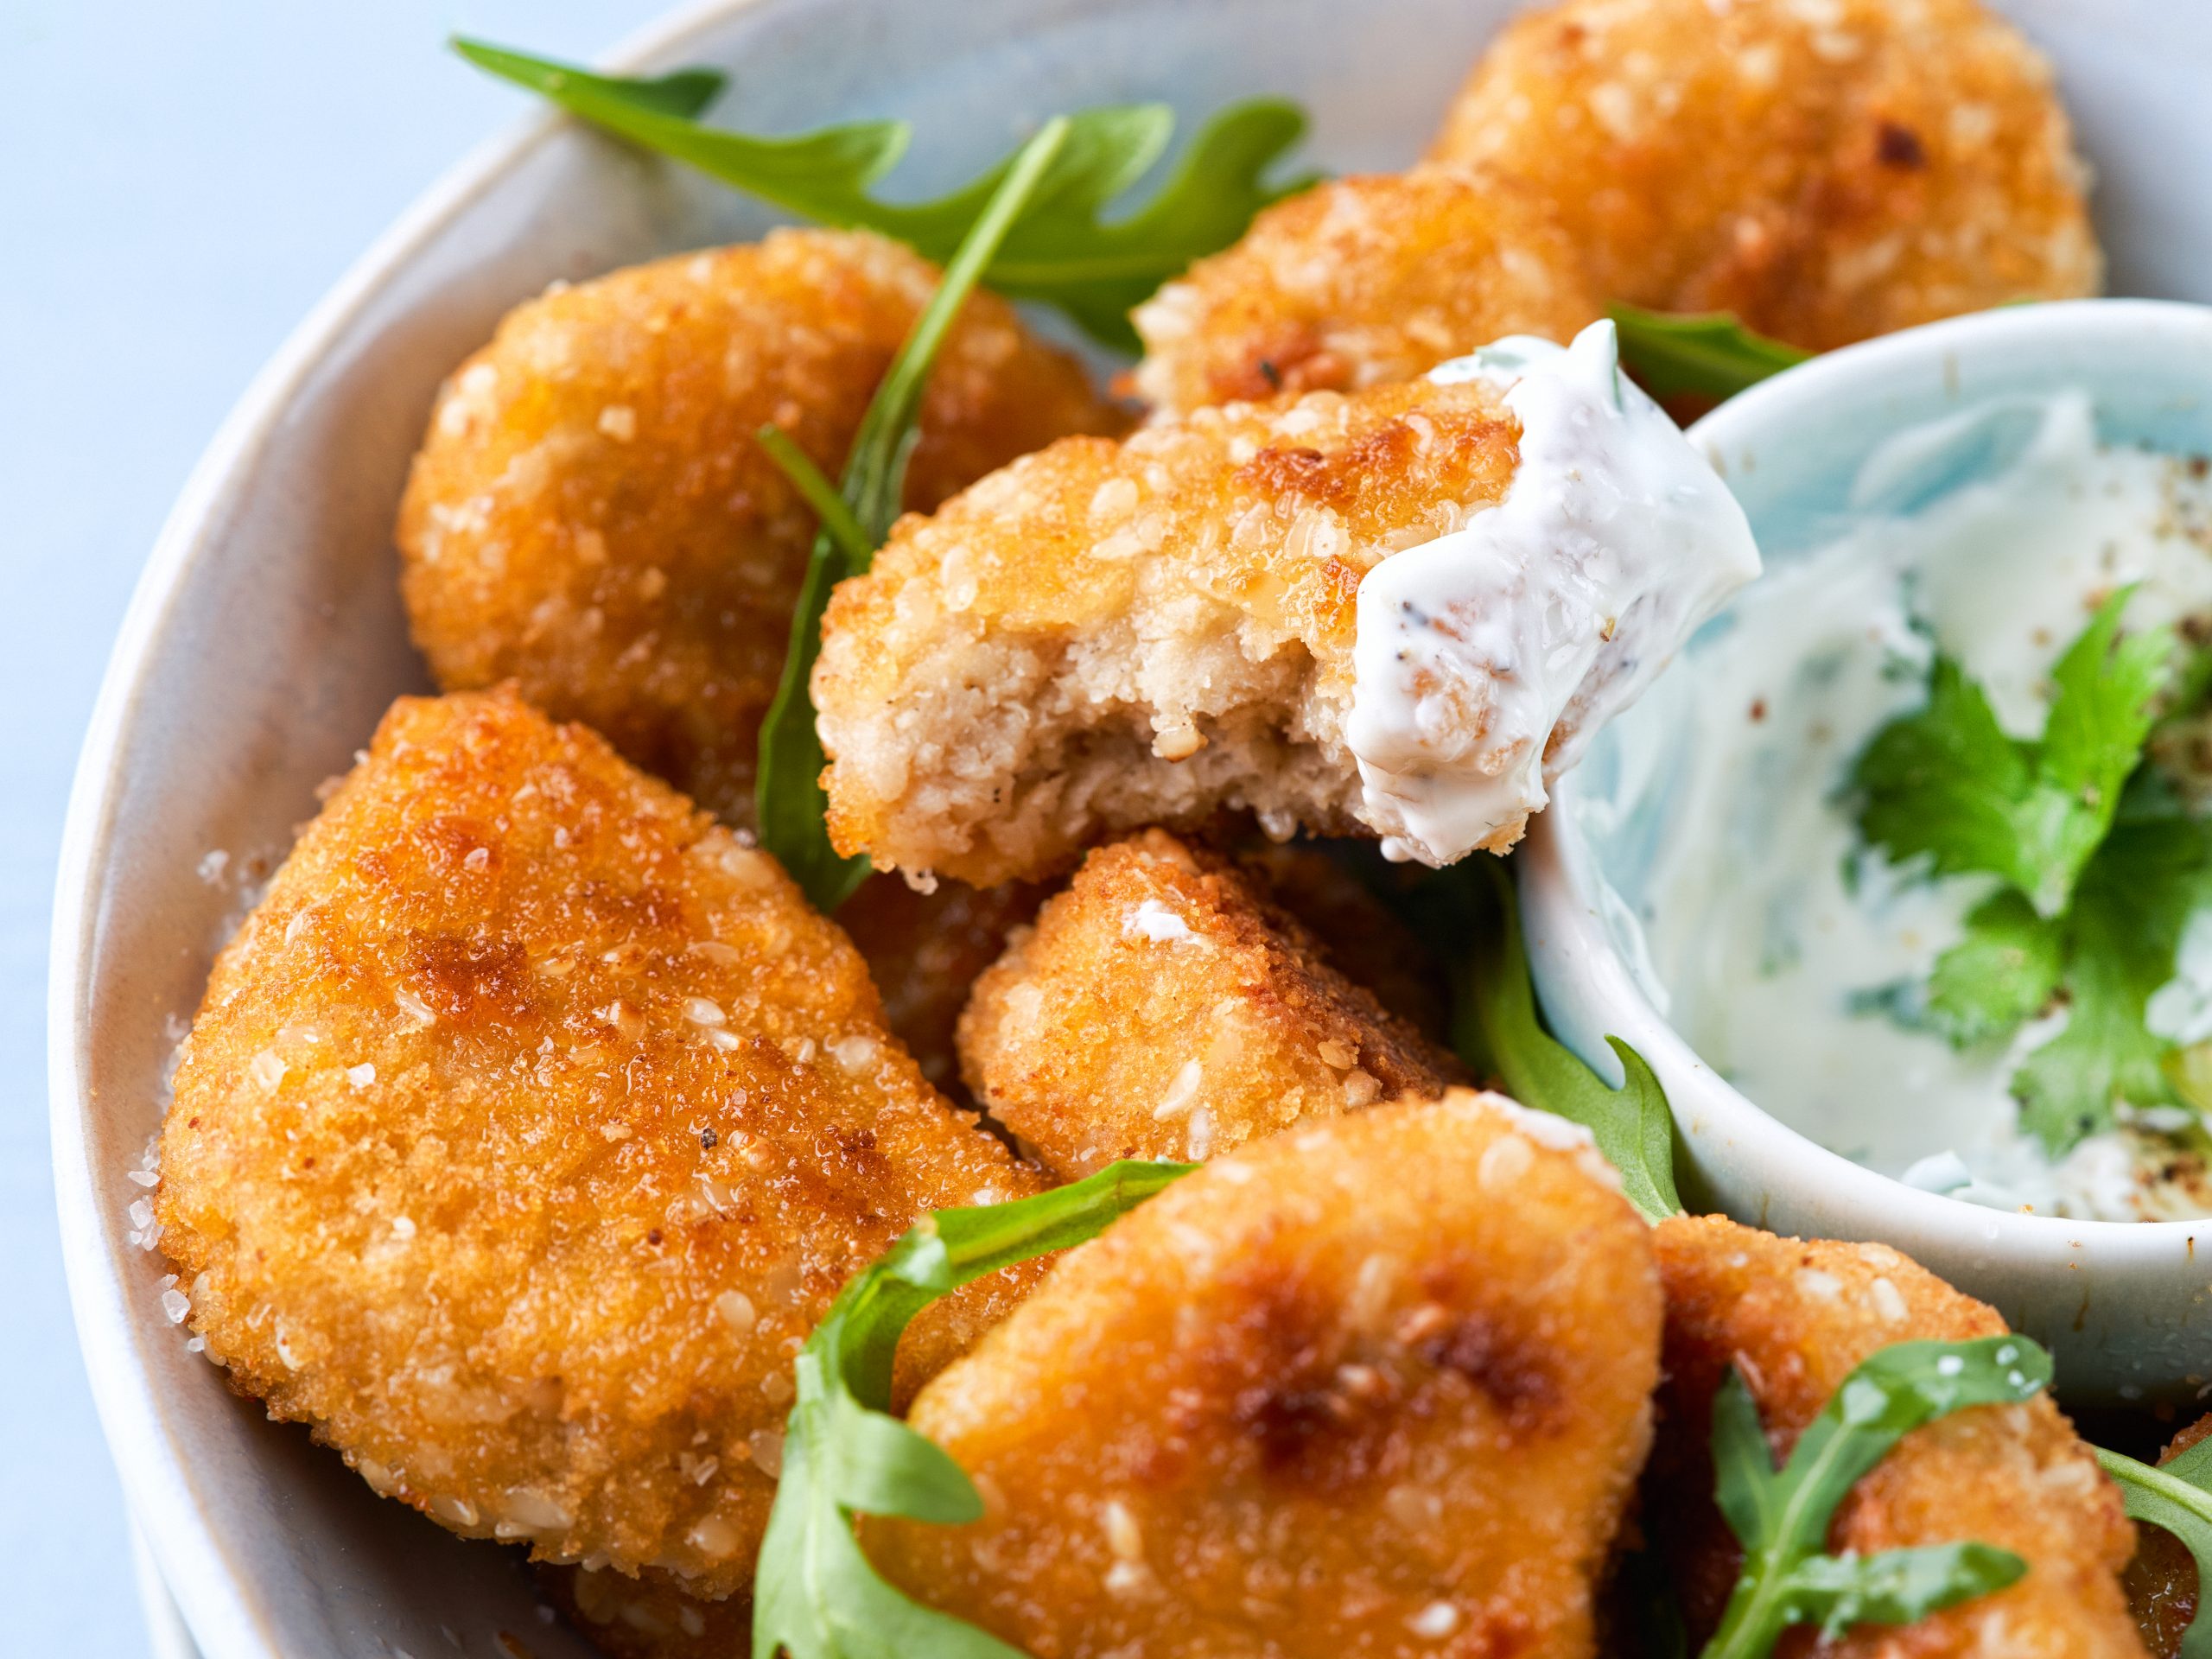 plant-based nuggets